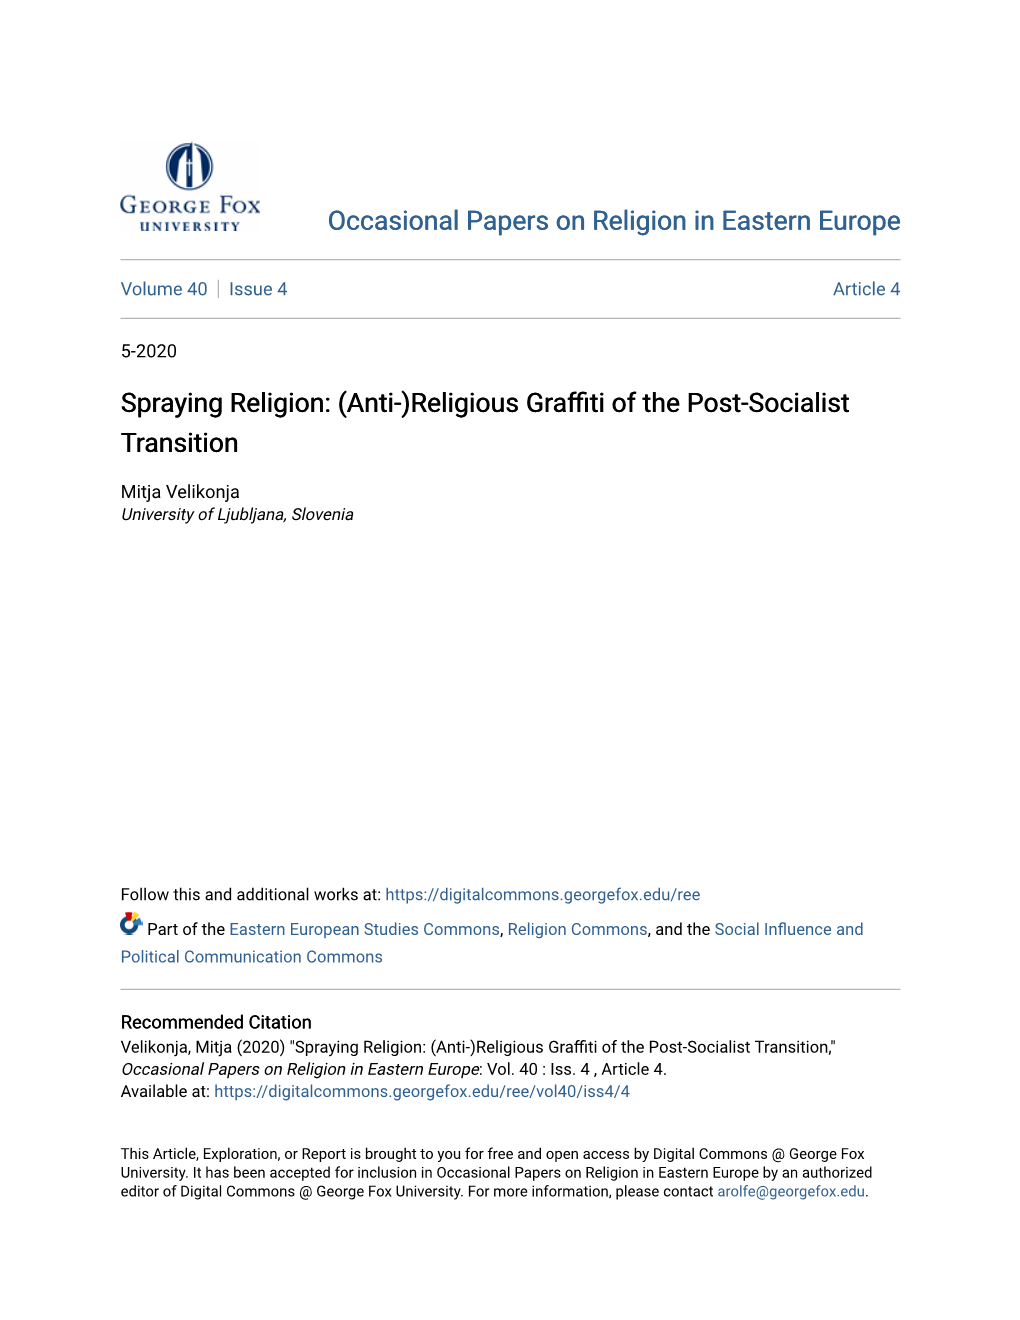 Spraying Religion: (Anti-)Religious Graffiti of the Post-Socialist Transition," Occasional Papers on Religion in Eastern Europe: Vol